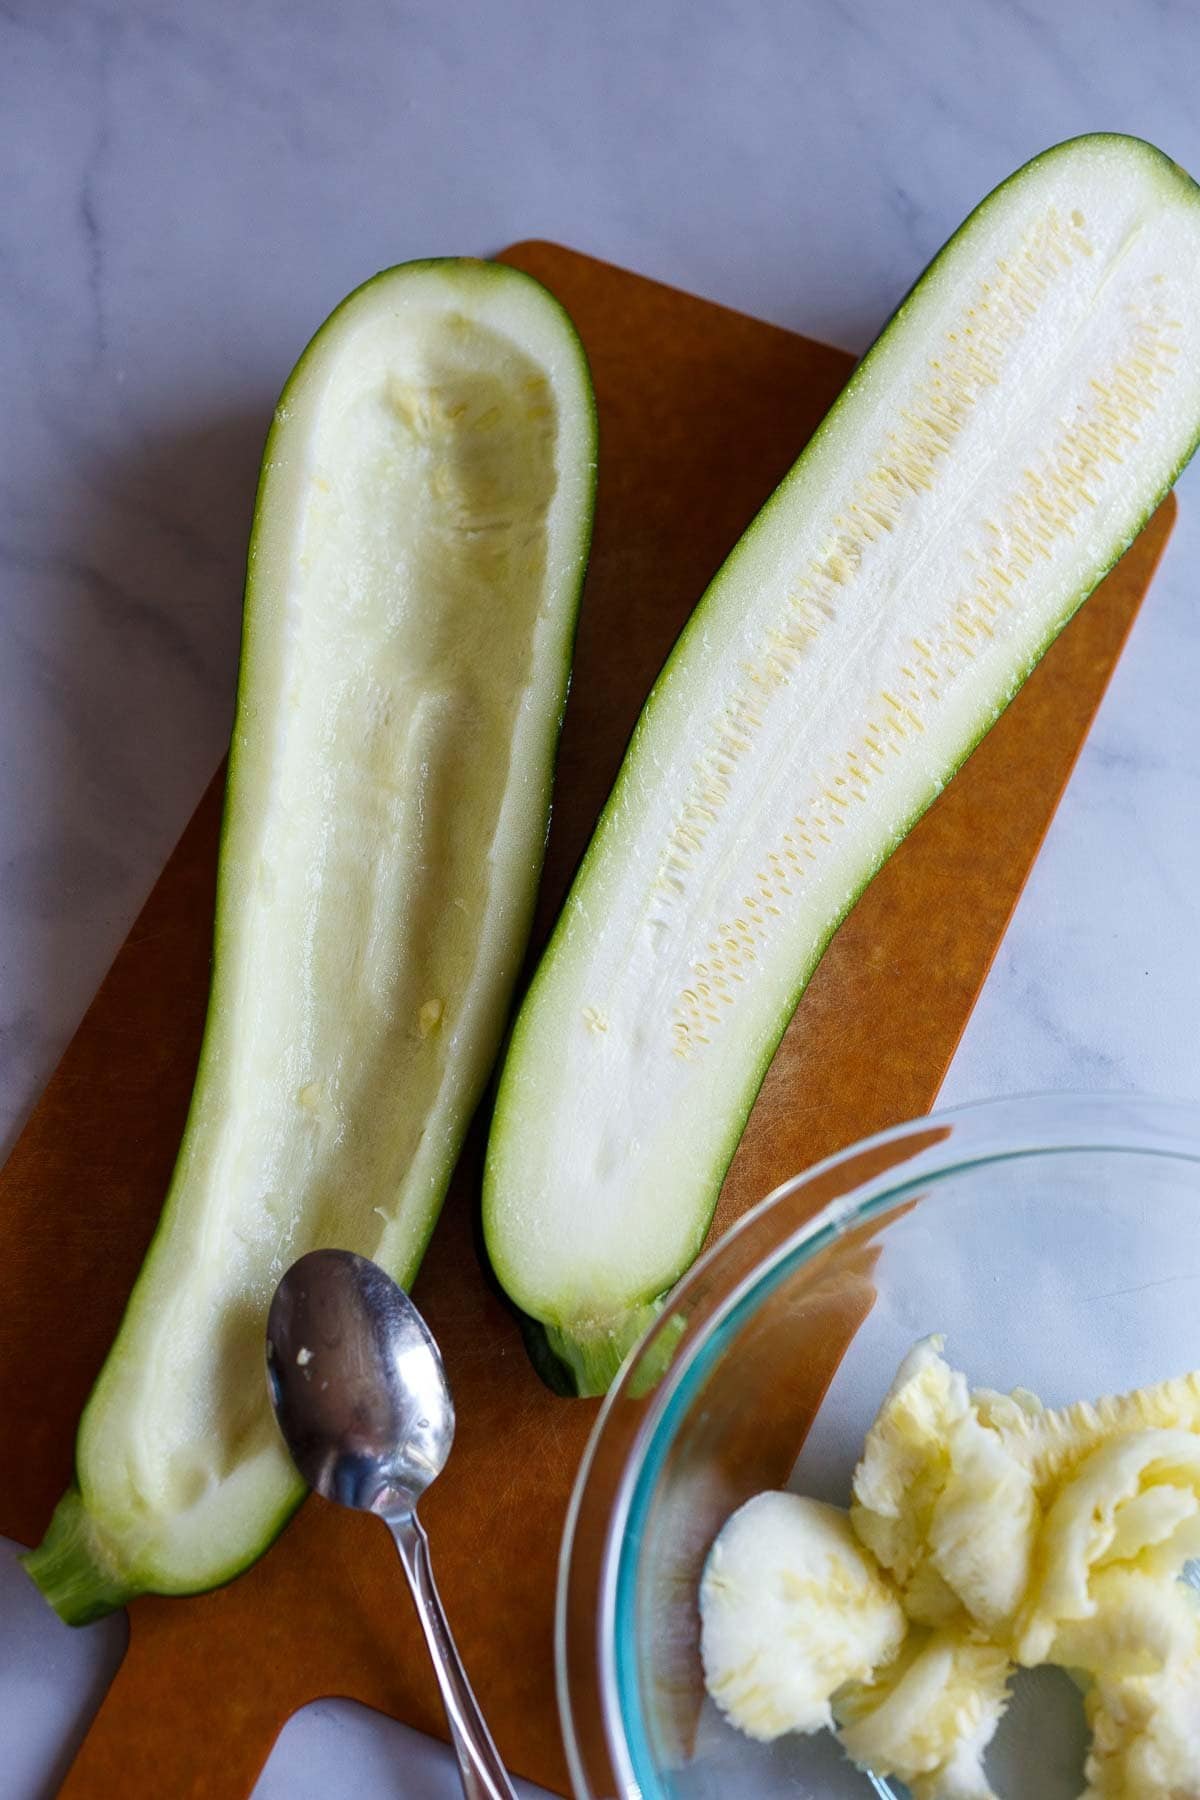 Zucchini sliced in half and holled out.